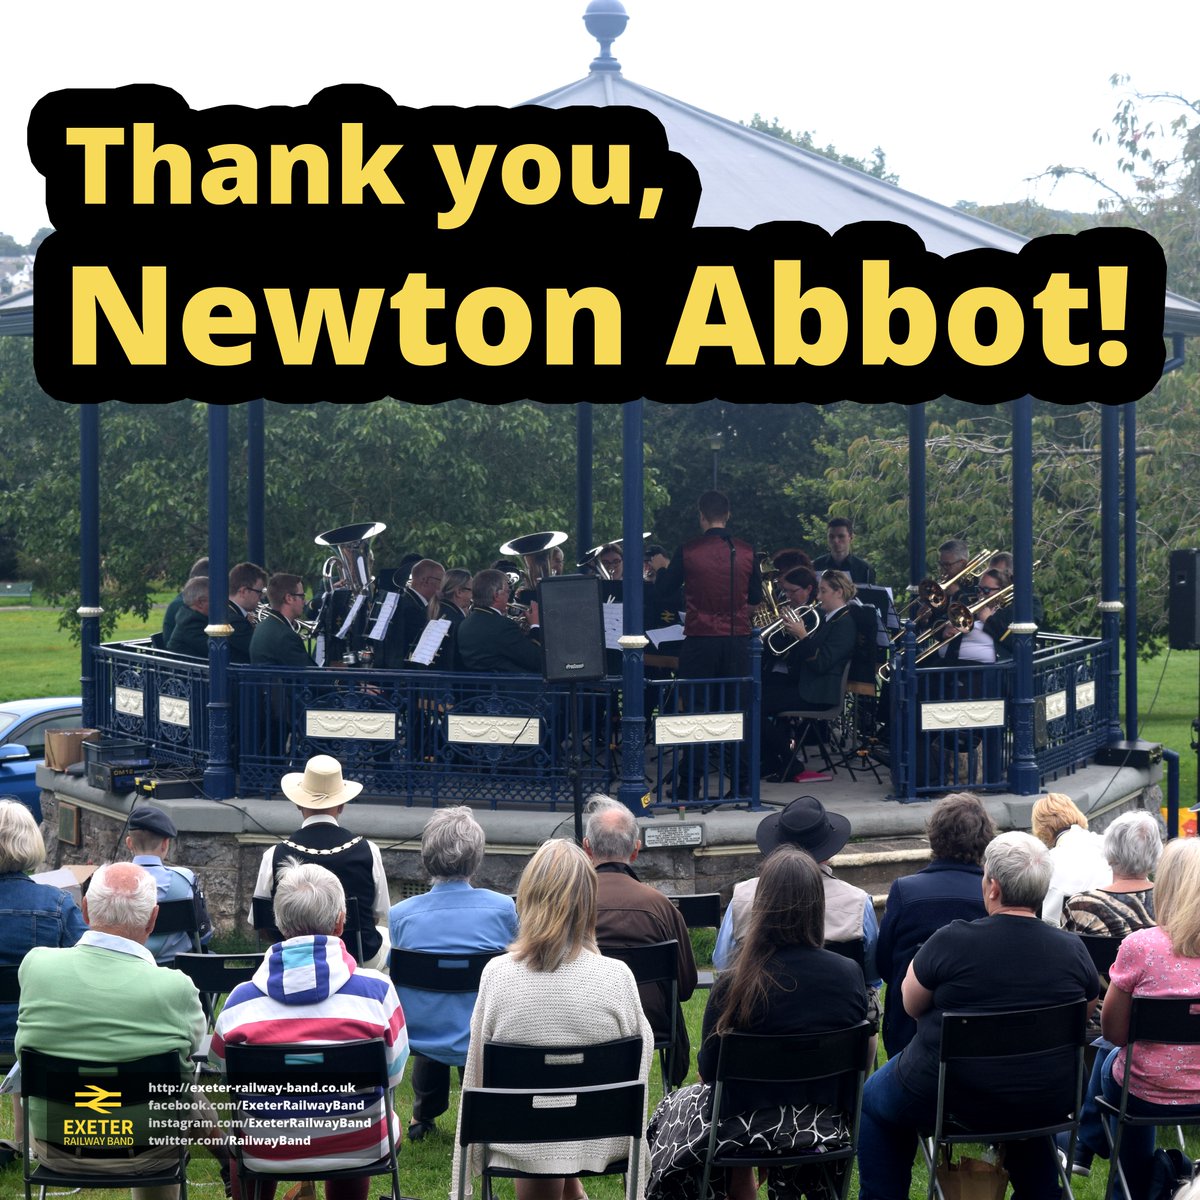 We're still getting over how much we enjoyed our concert yesterday in Courtenay Park! Thank you very much to @NewtonAbbotCoun for inviting us, and especially to the mayor, Cllr. David Corney-Walker. More photos on Facebook and Instagram. [@newtonabbottown, @NewtonAbbotCofC]